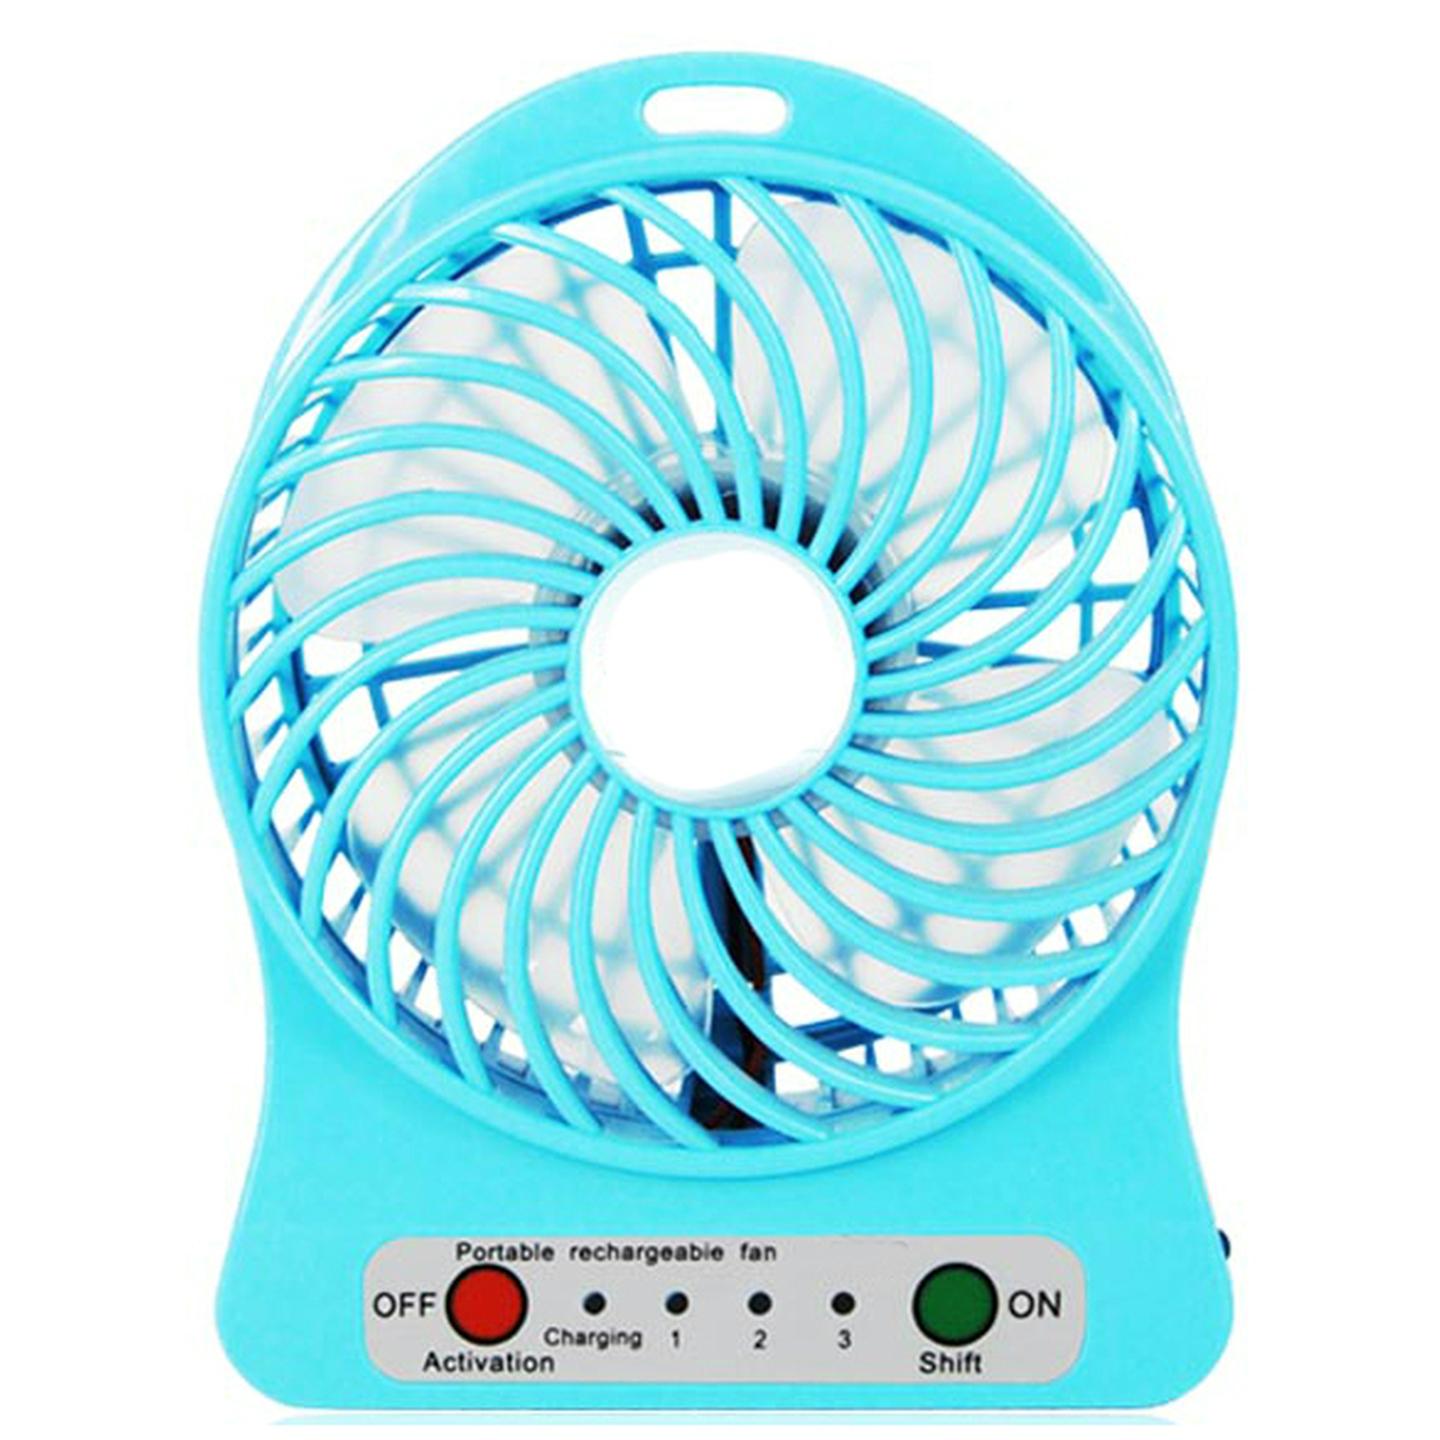 Mini USB Rechargeable Fan with LED Light - Blue